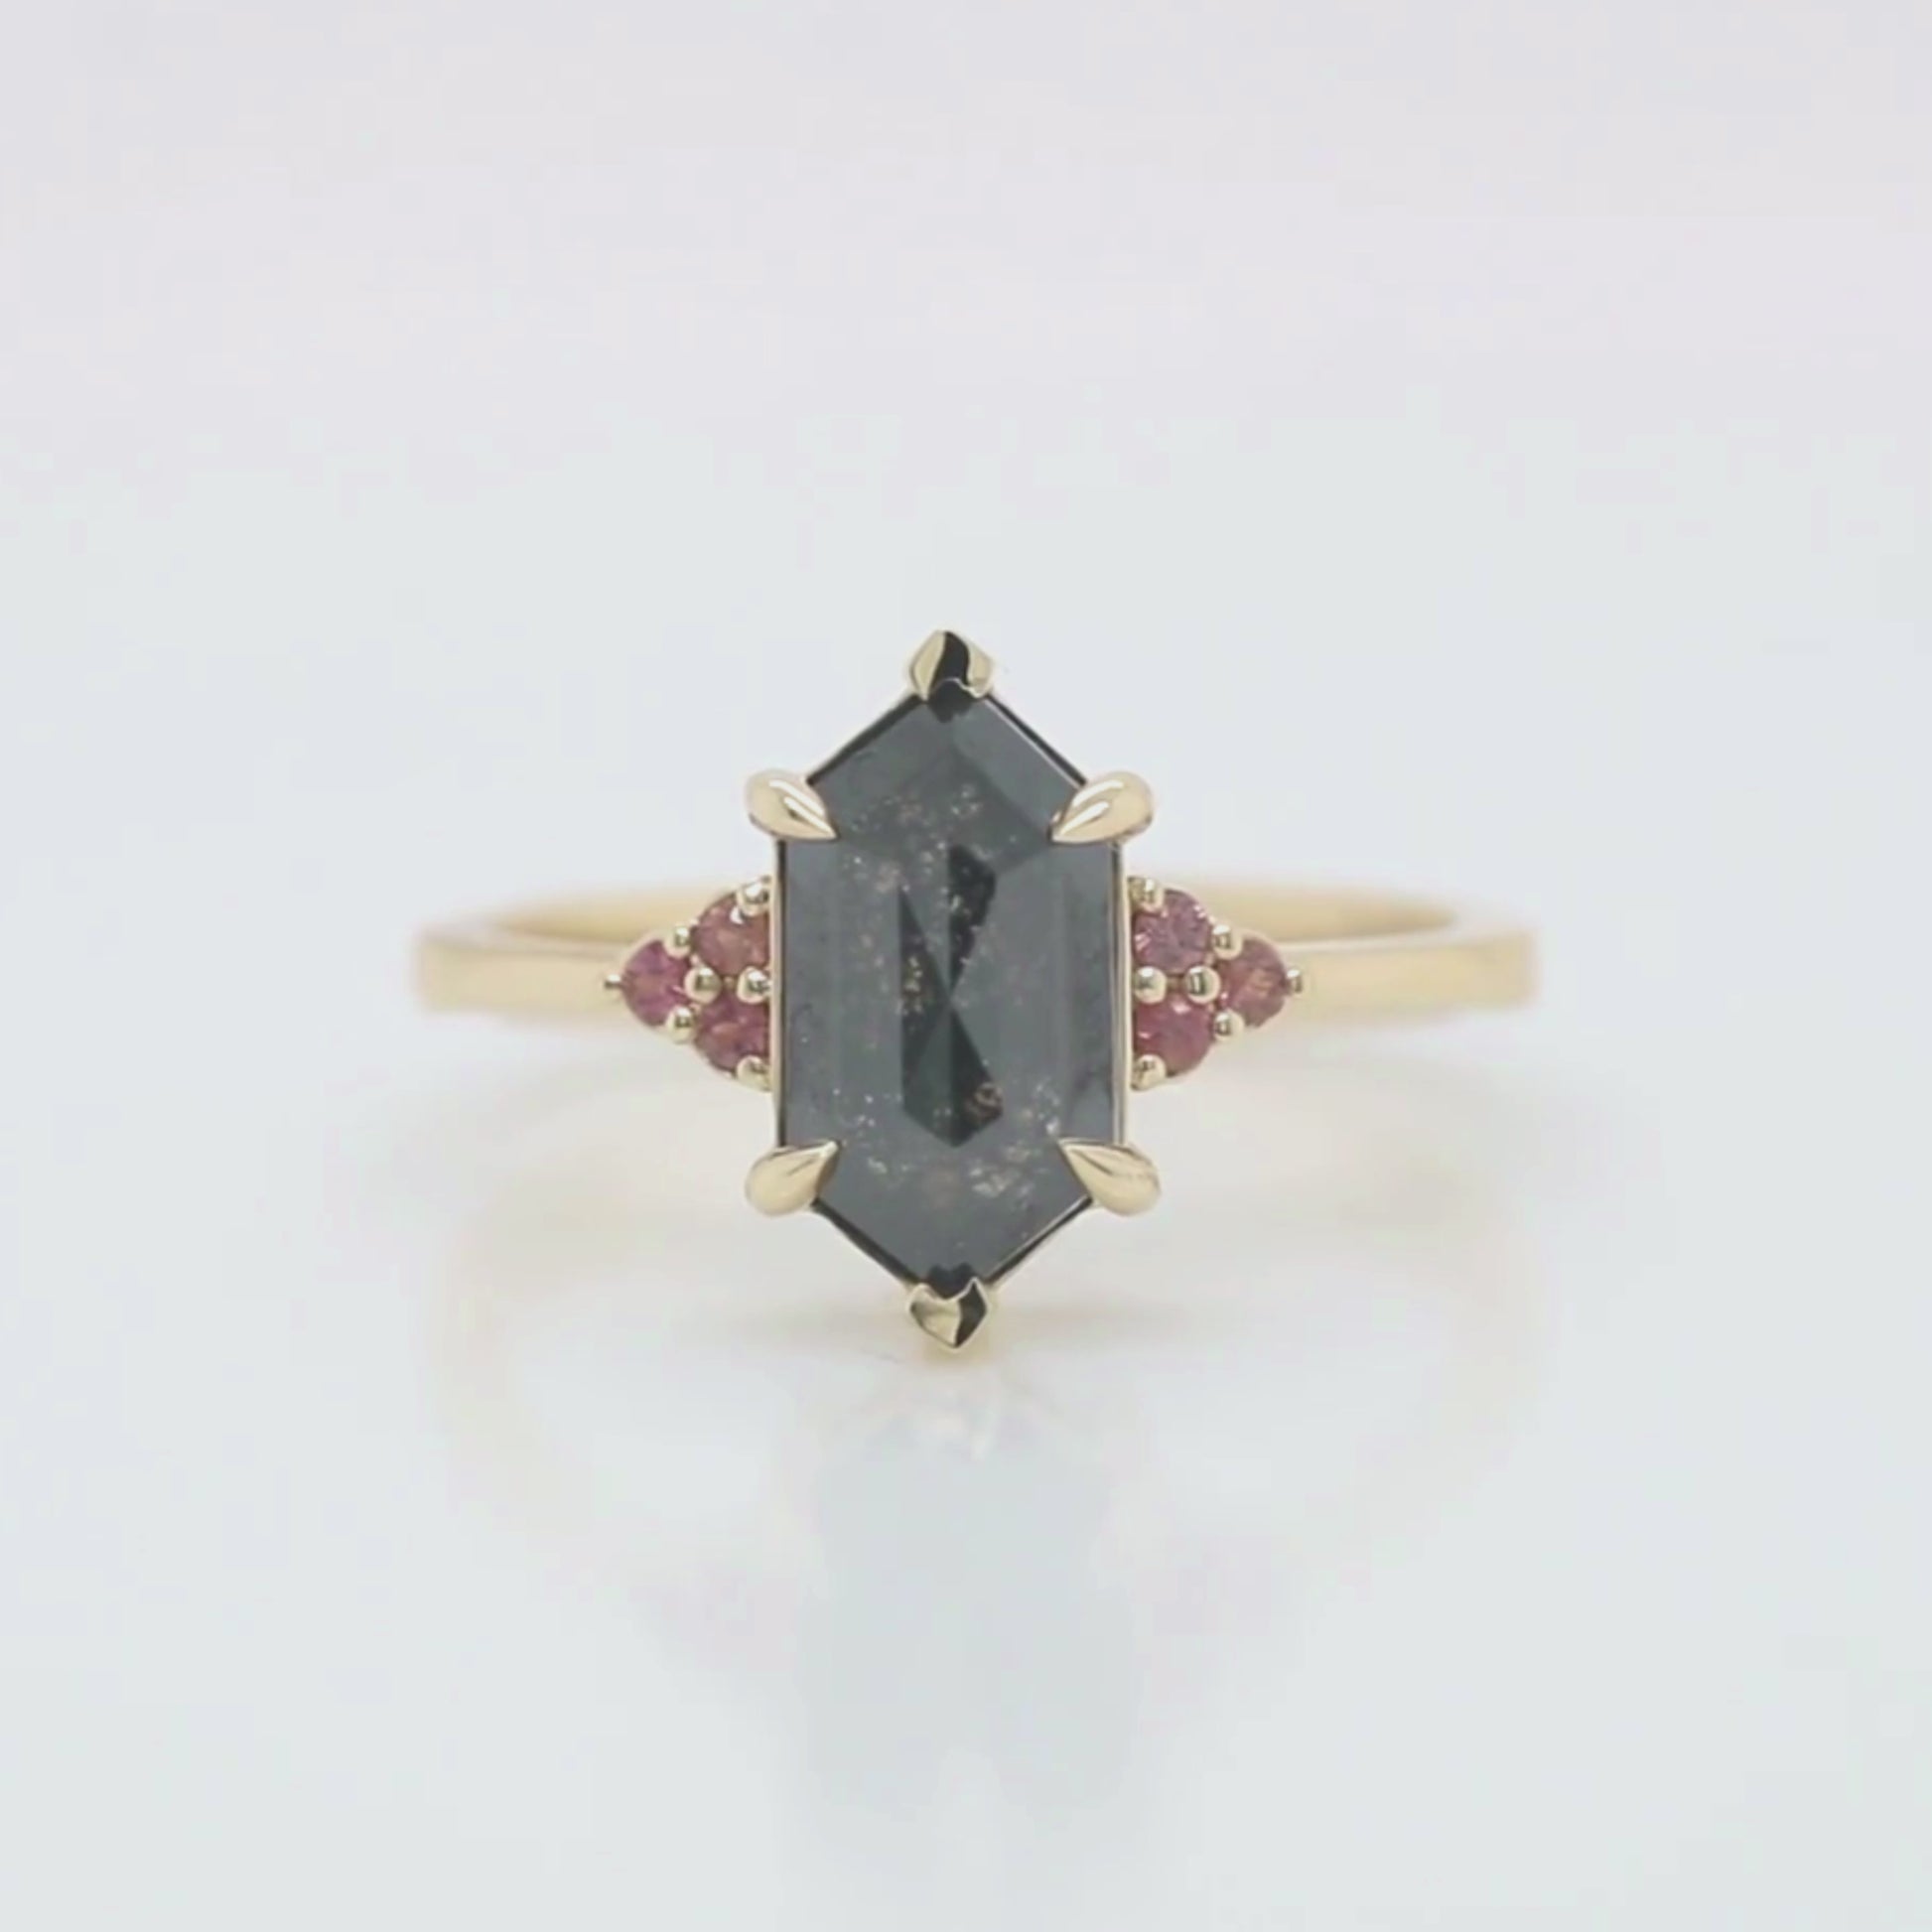 Imogene Ring with a 2.21 Carat Hexagon Black Salt and Pepper Diamond and Berry Sapphire Accents in 14k Yellow Gold - Ready to Size and Ship